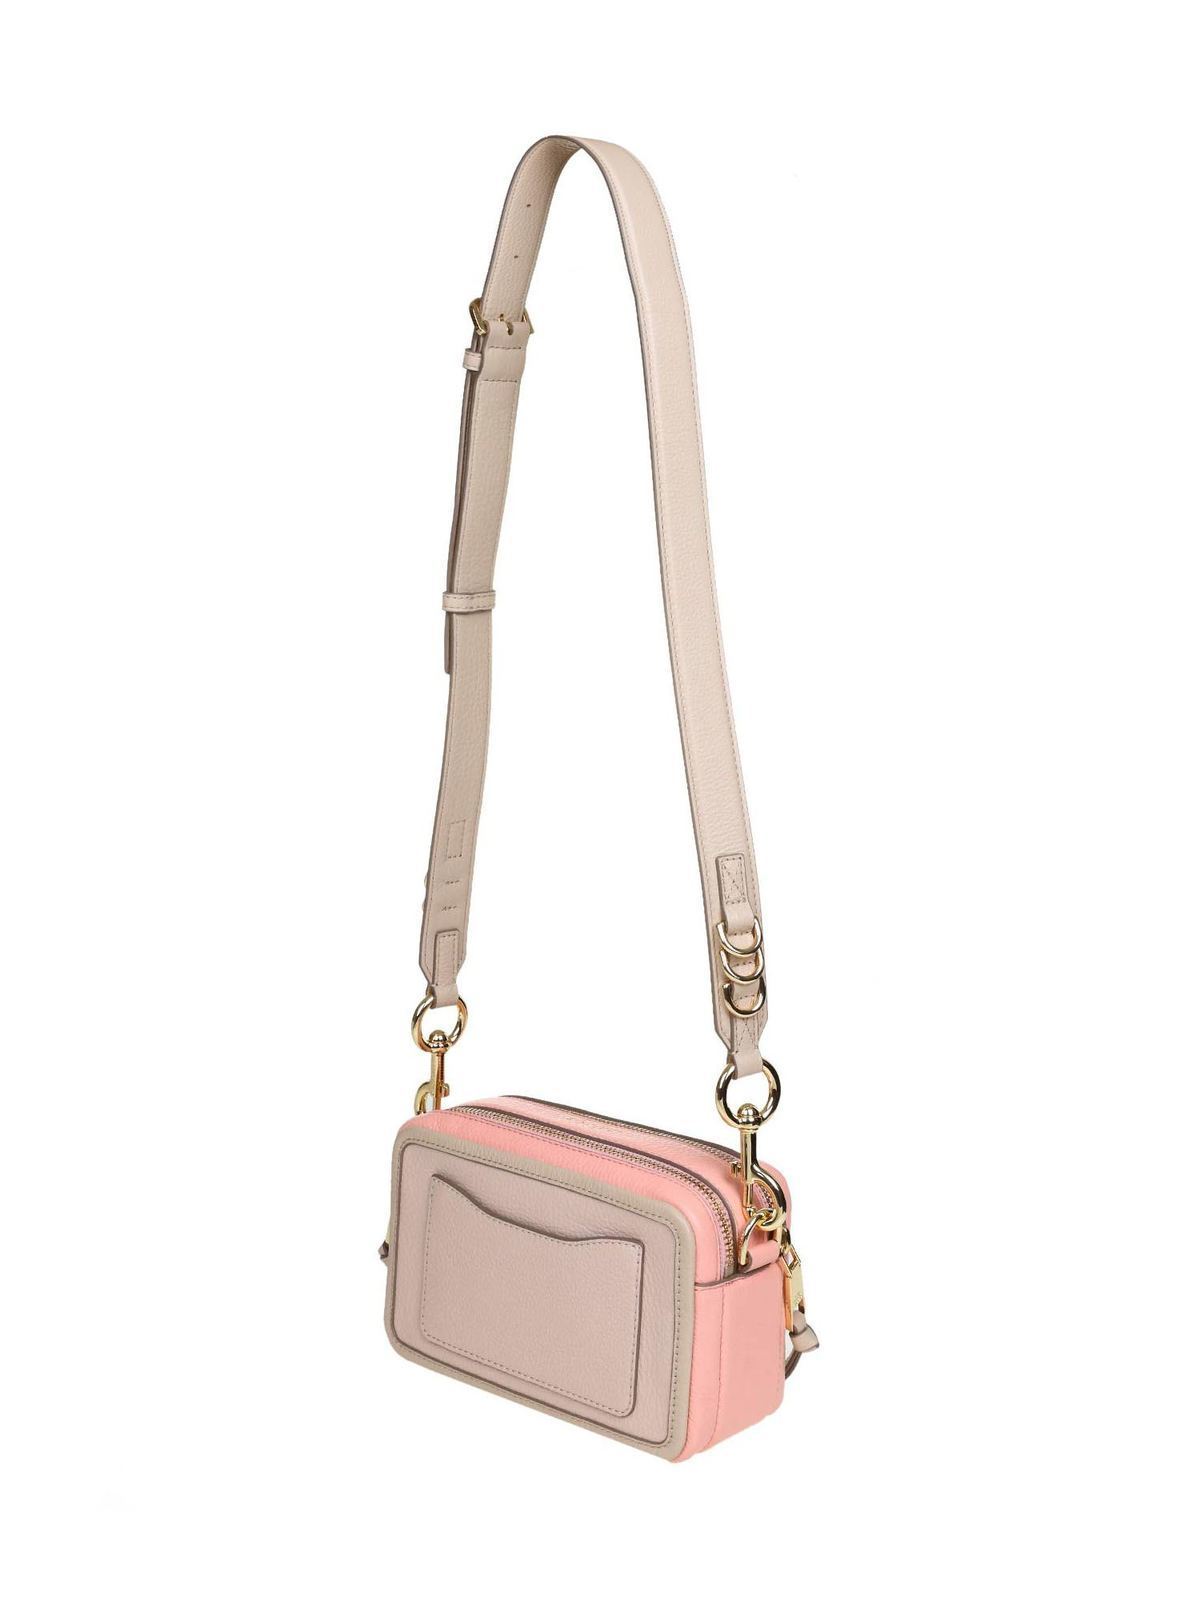 Cross body bags Marc Jacobs - Softshot crossbody bag in Apricot Beige color  - H109L01SP21272